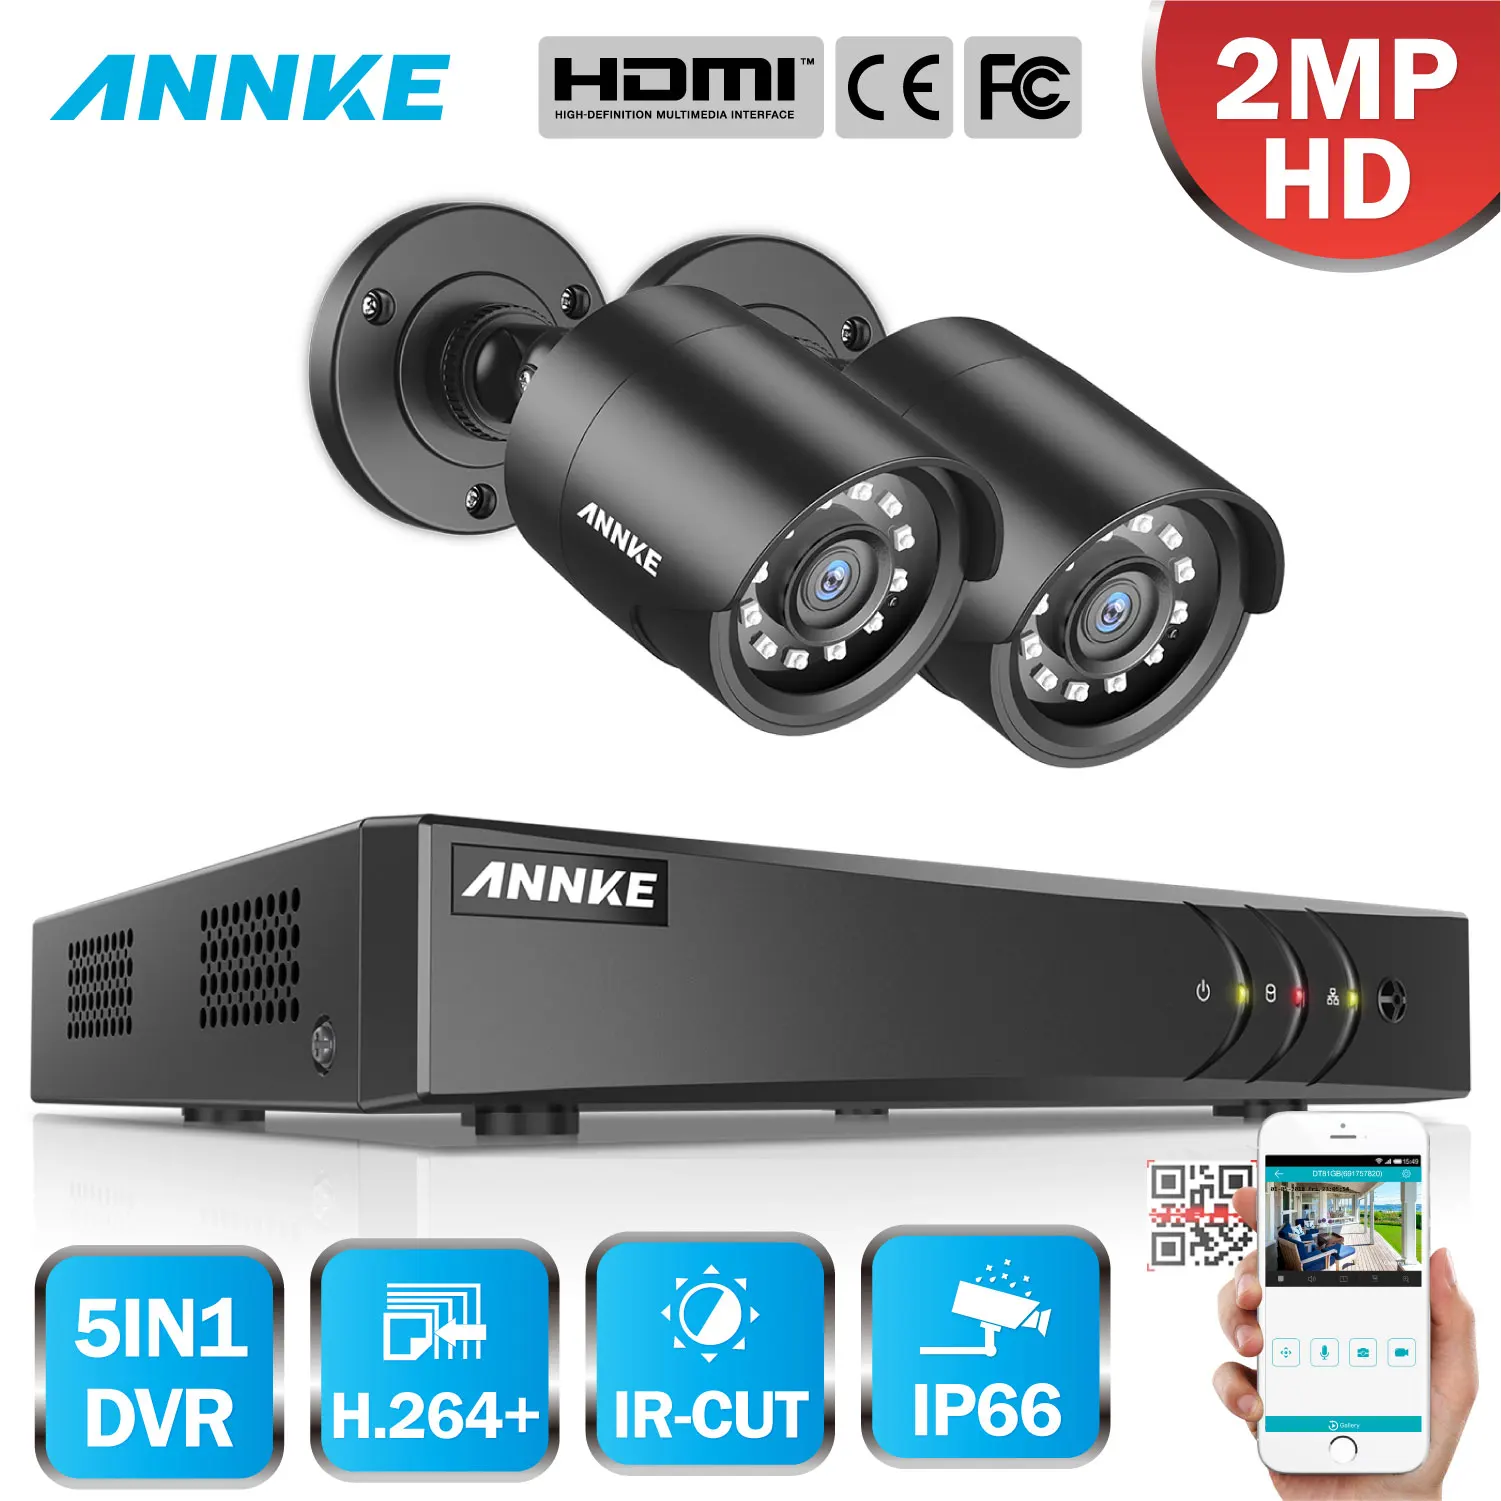 

ANNKE 4CH 1080P Security Video CCTV System 5in1 1080N H.264+ DVR With 2X HD TVI Smart IR Bullet Weatherproof Surveillance Camera